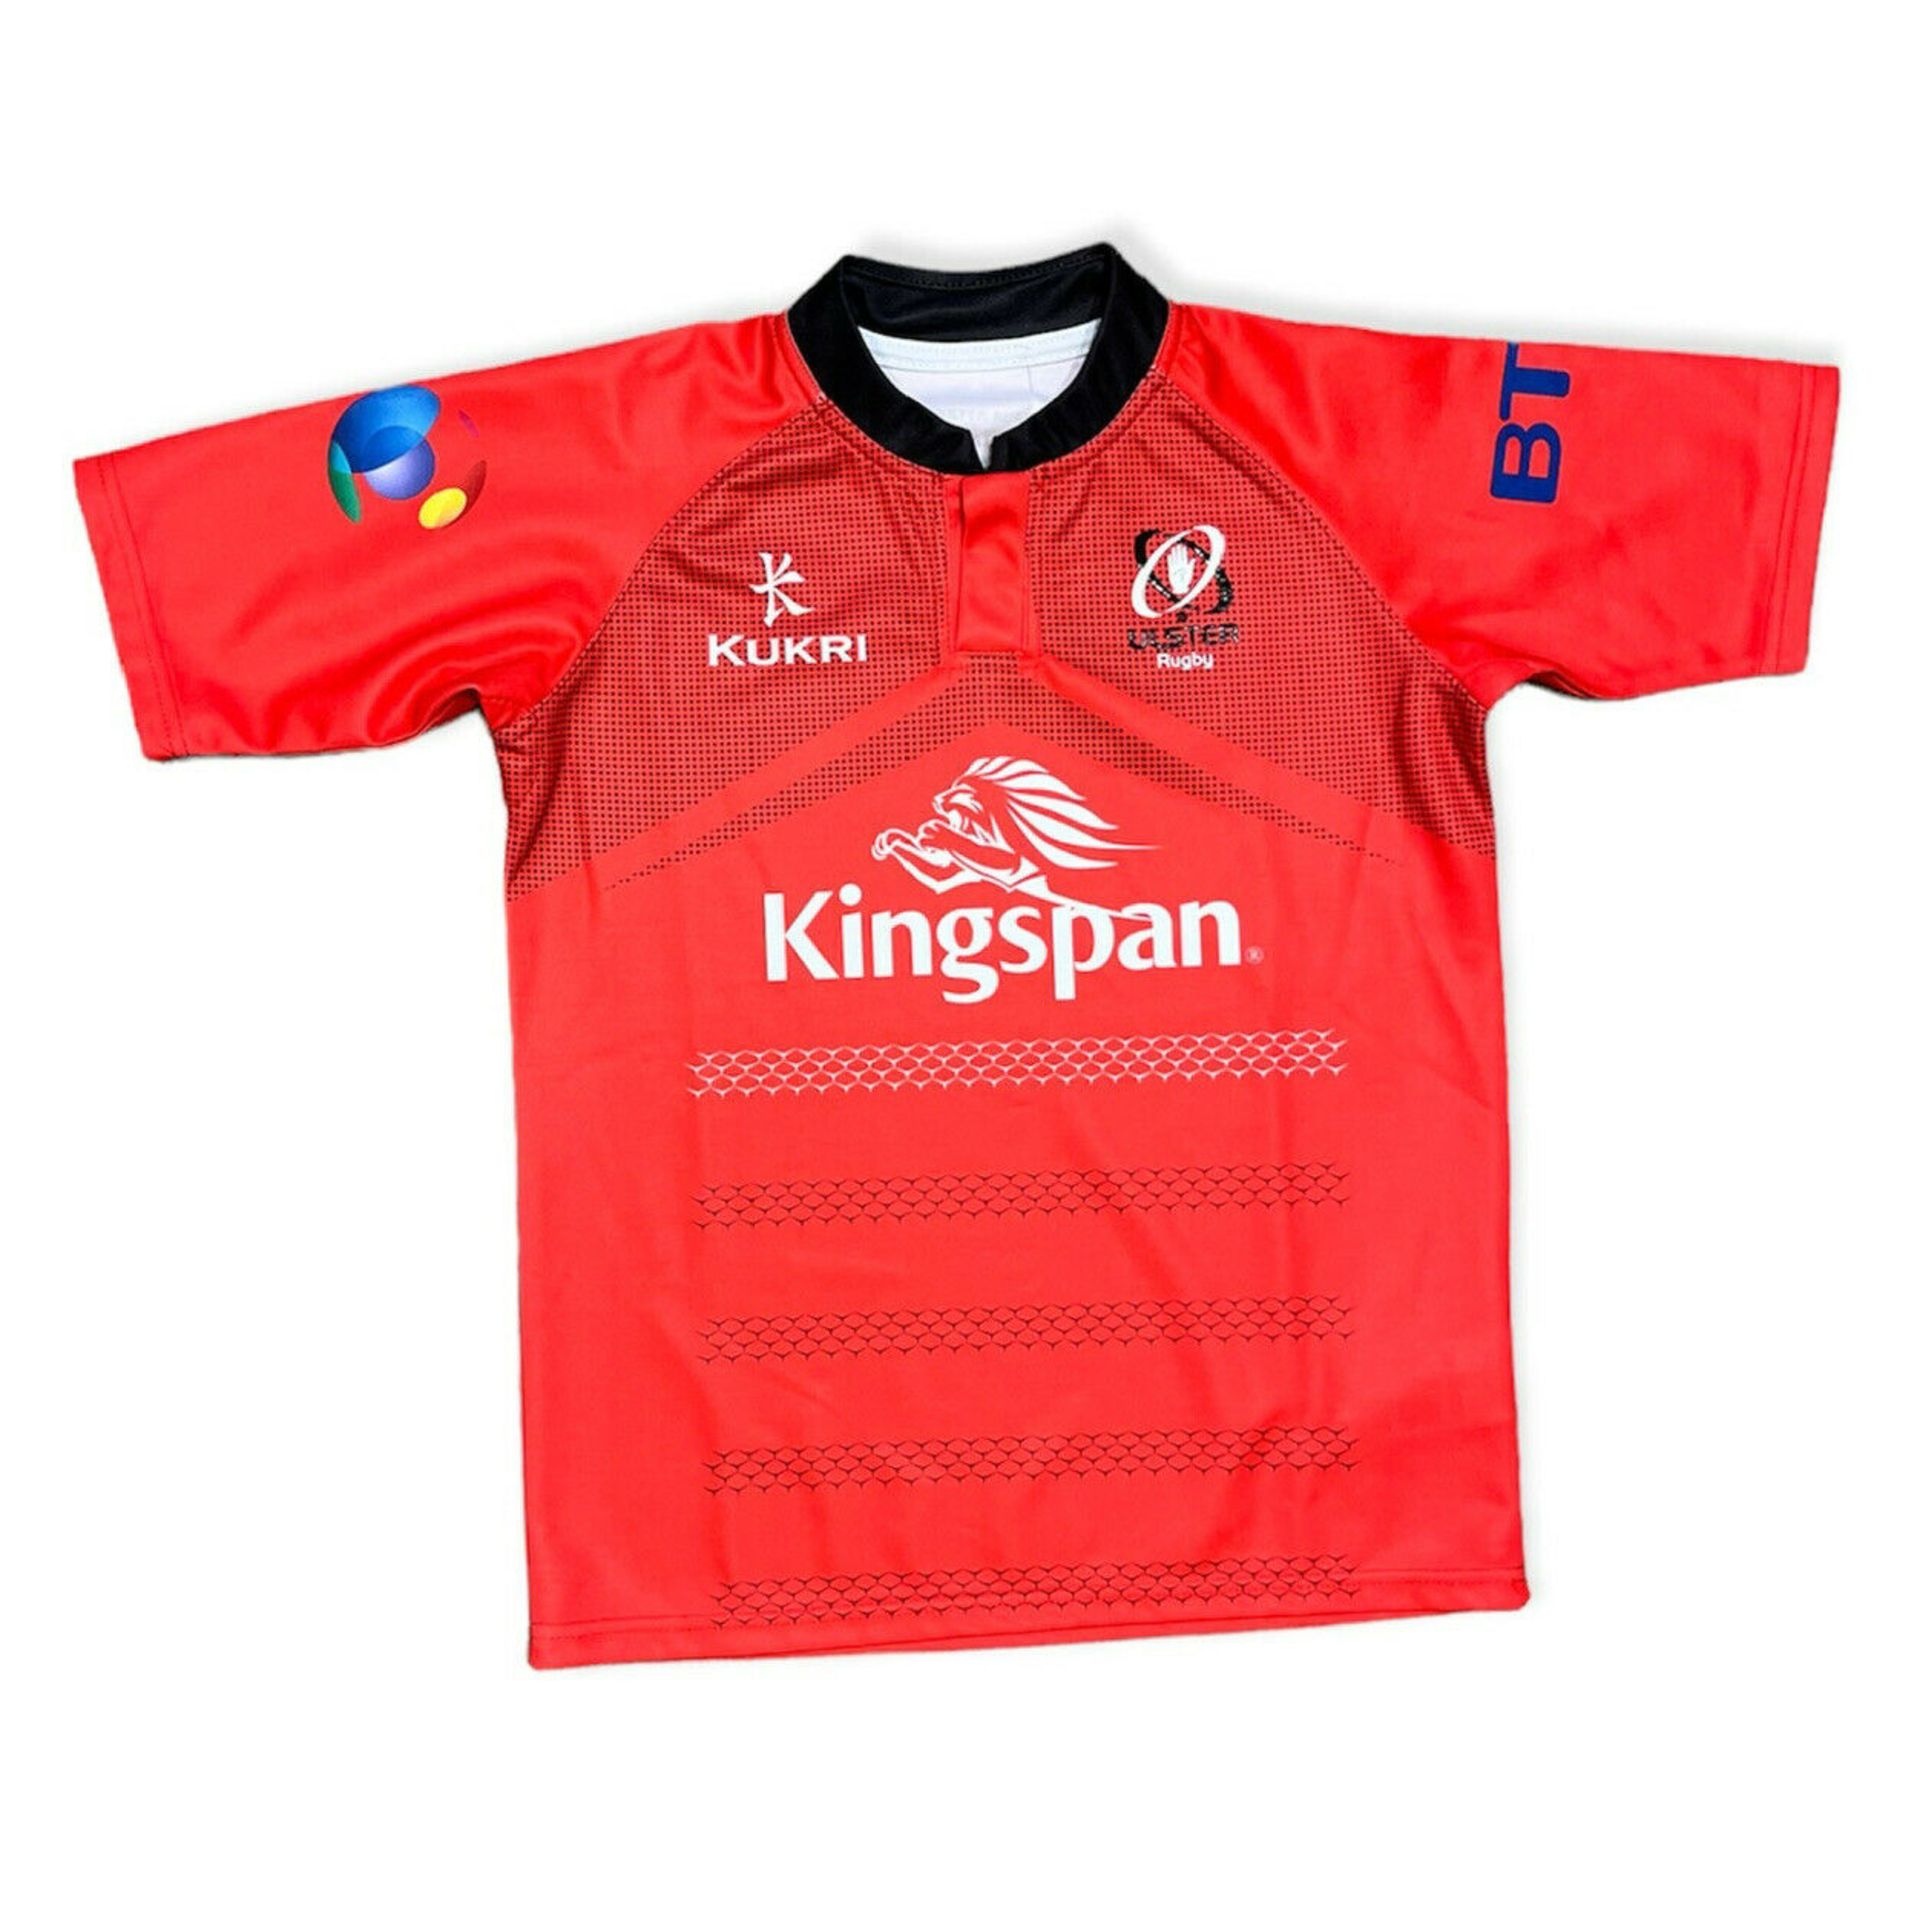 ulster rugbyshirt 9-10 years RRP £45